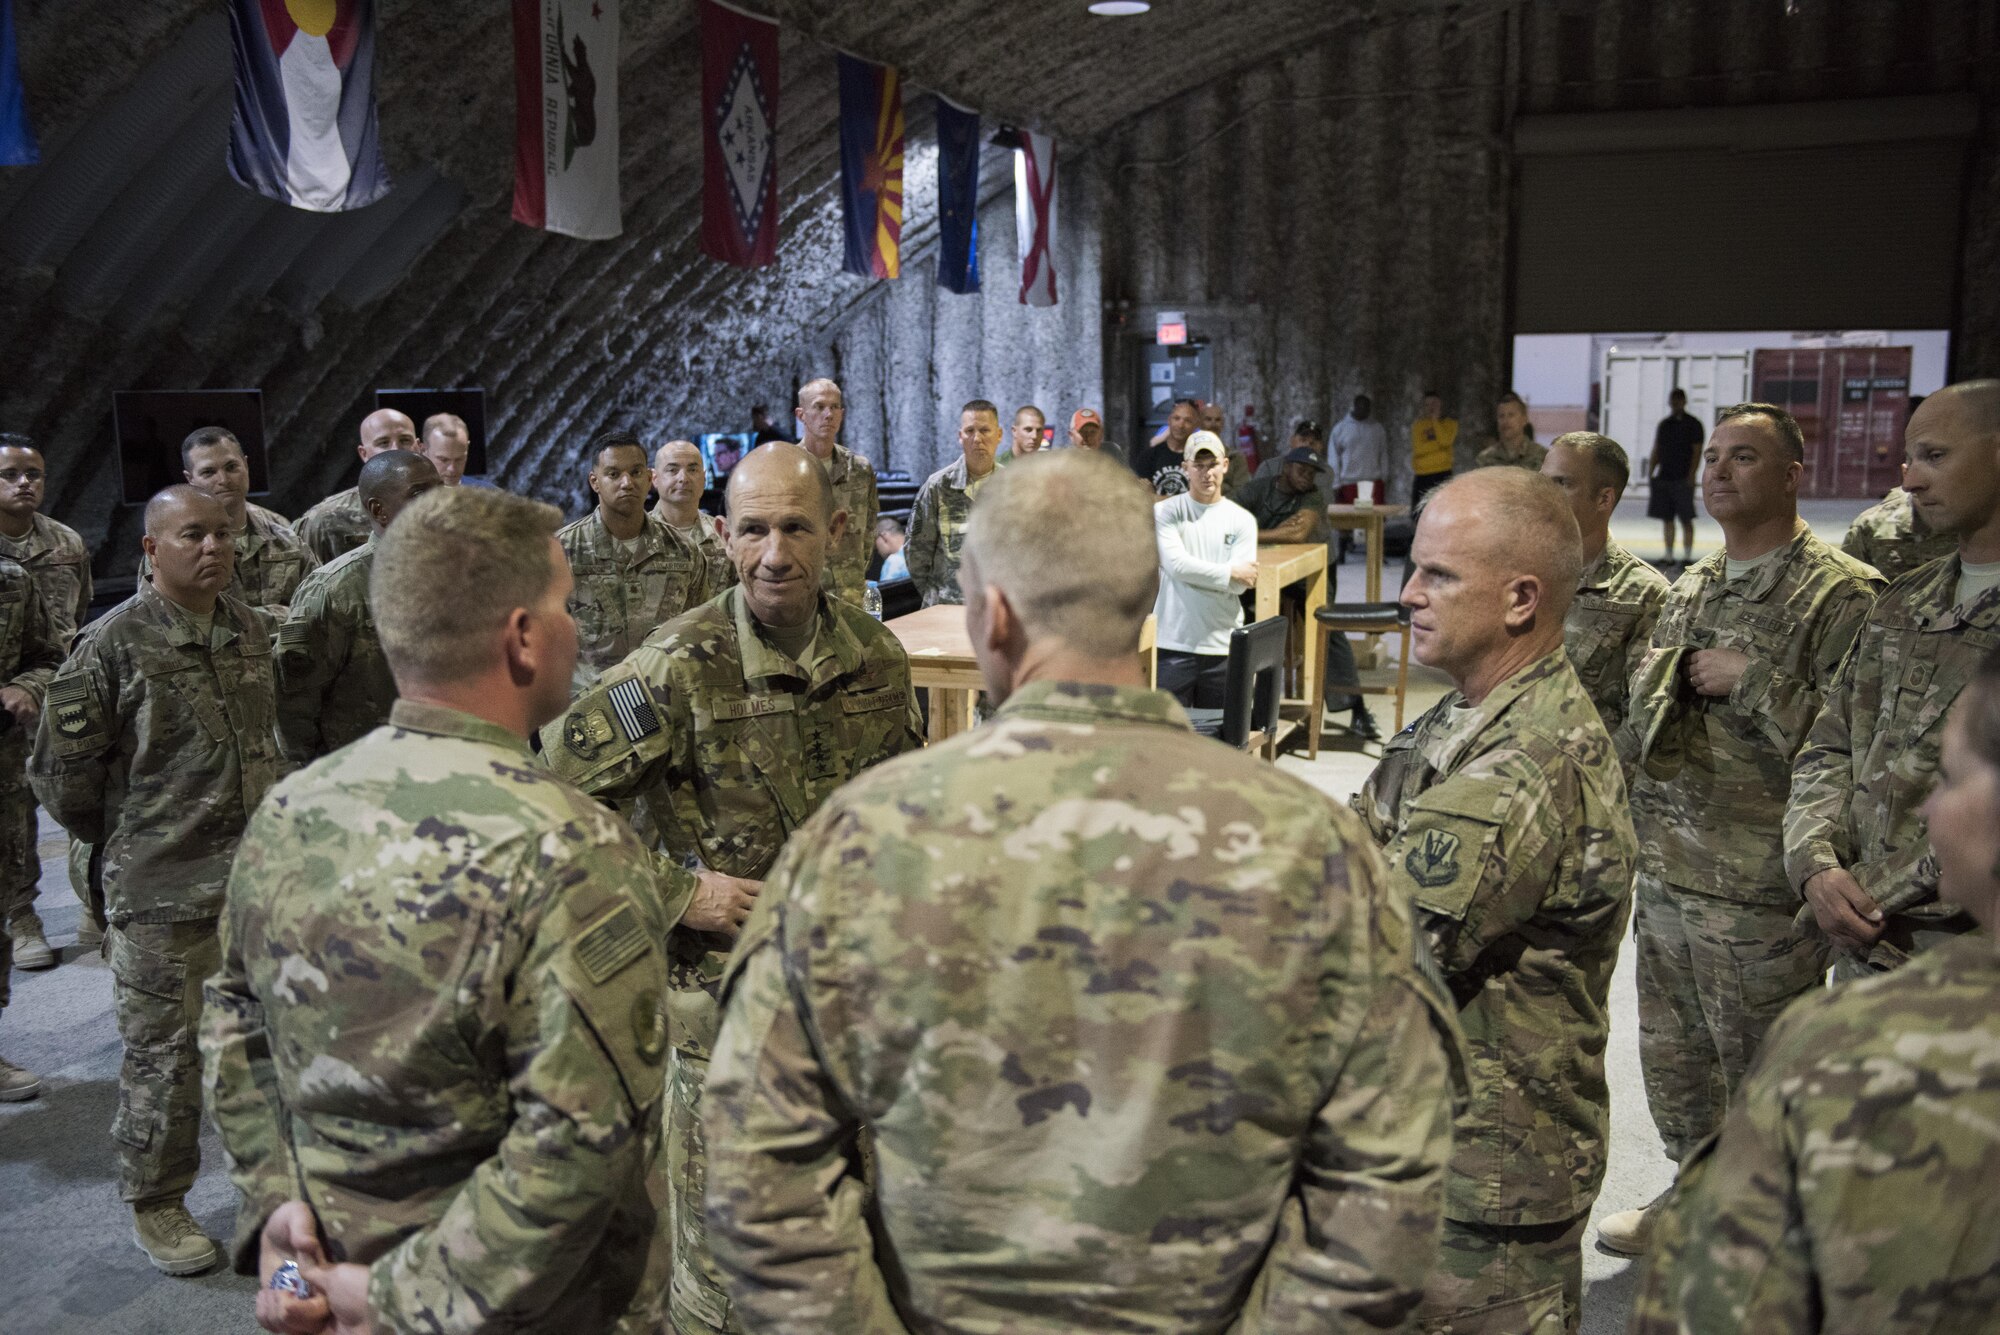 Gen. Mike Holmes, commander of Air Combat Command, and Chief Master Sgt. Frank H. Batten III, ACC command chief, speaks to 332nd Air Expeditionary Wing Airmen during a troop visit May 21, 2017, in Southwest Asia. As part of the tour Holmes visited Airmen and their work centers. (U.S. Air Force photo/Senior Airman Damon Kasberg)